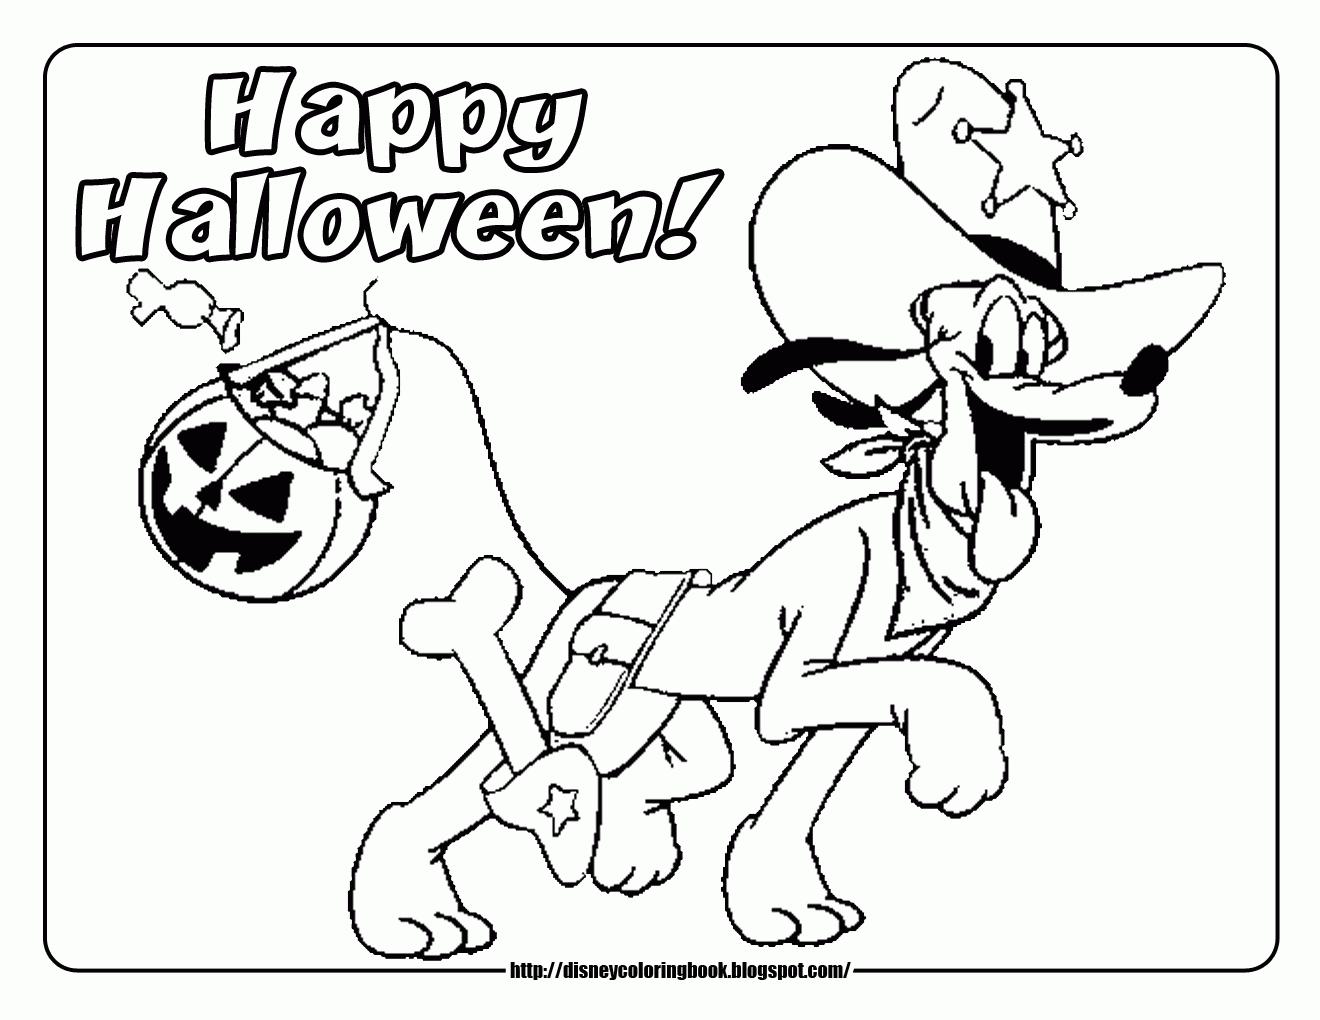 Disney Coloring Pages and Sheets for Kids